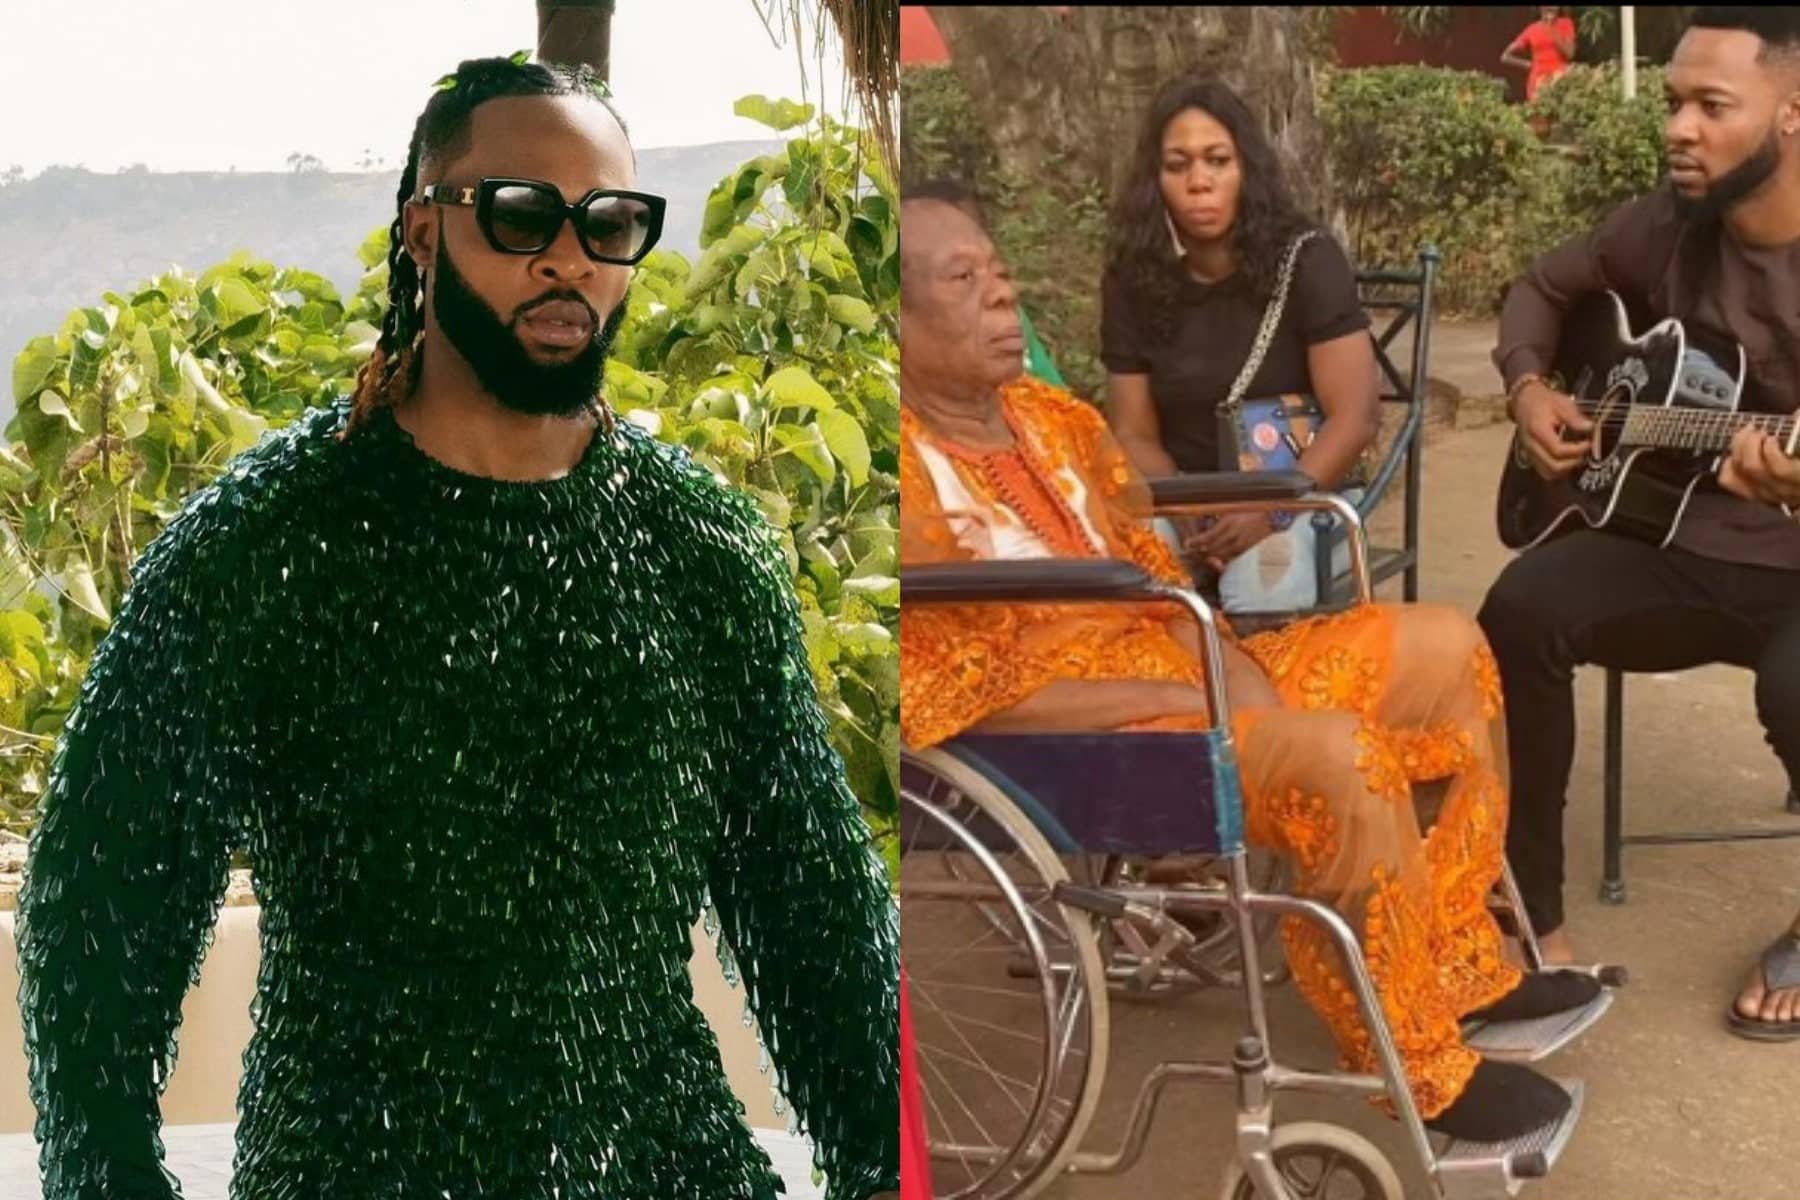 Flavour loses father